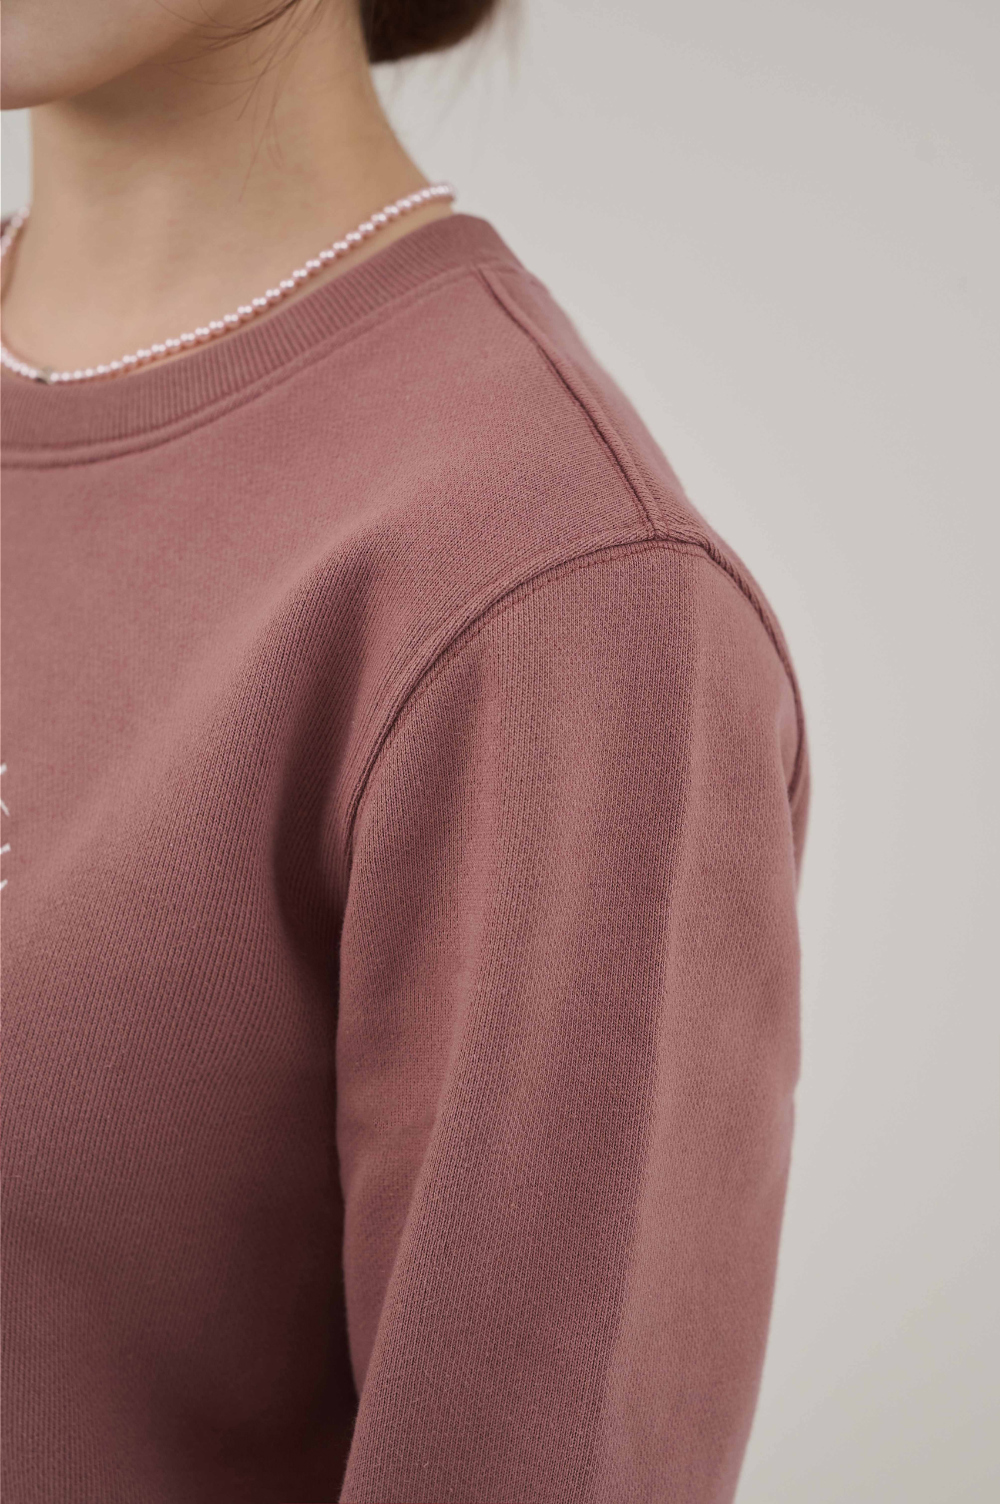 long sleeved tee detail image-S30L5